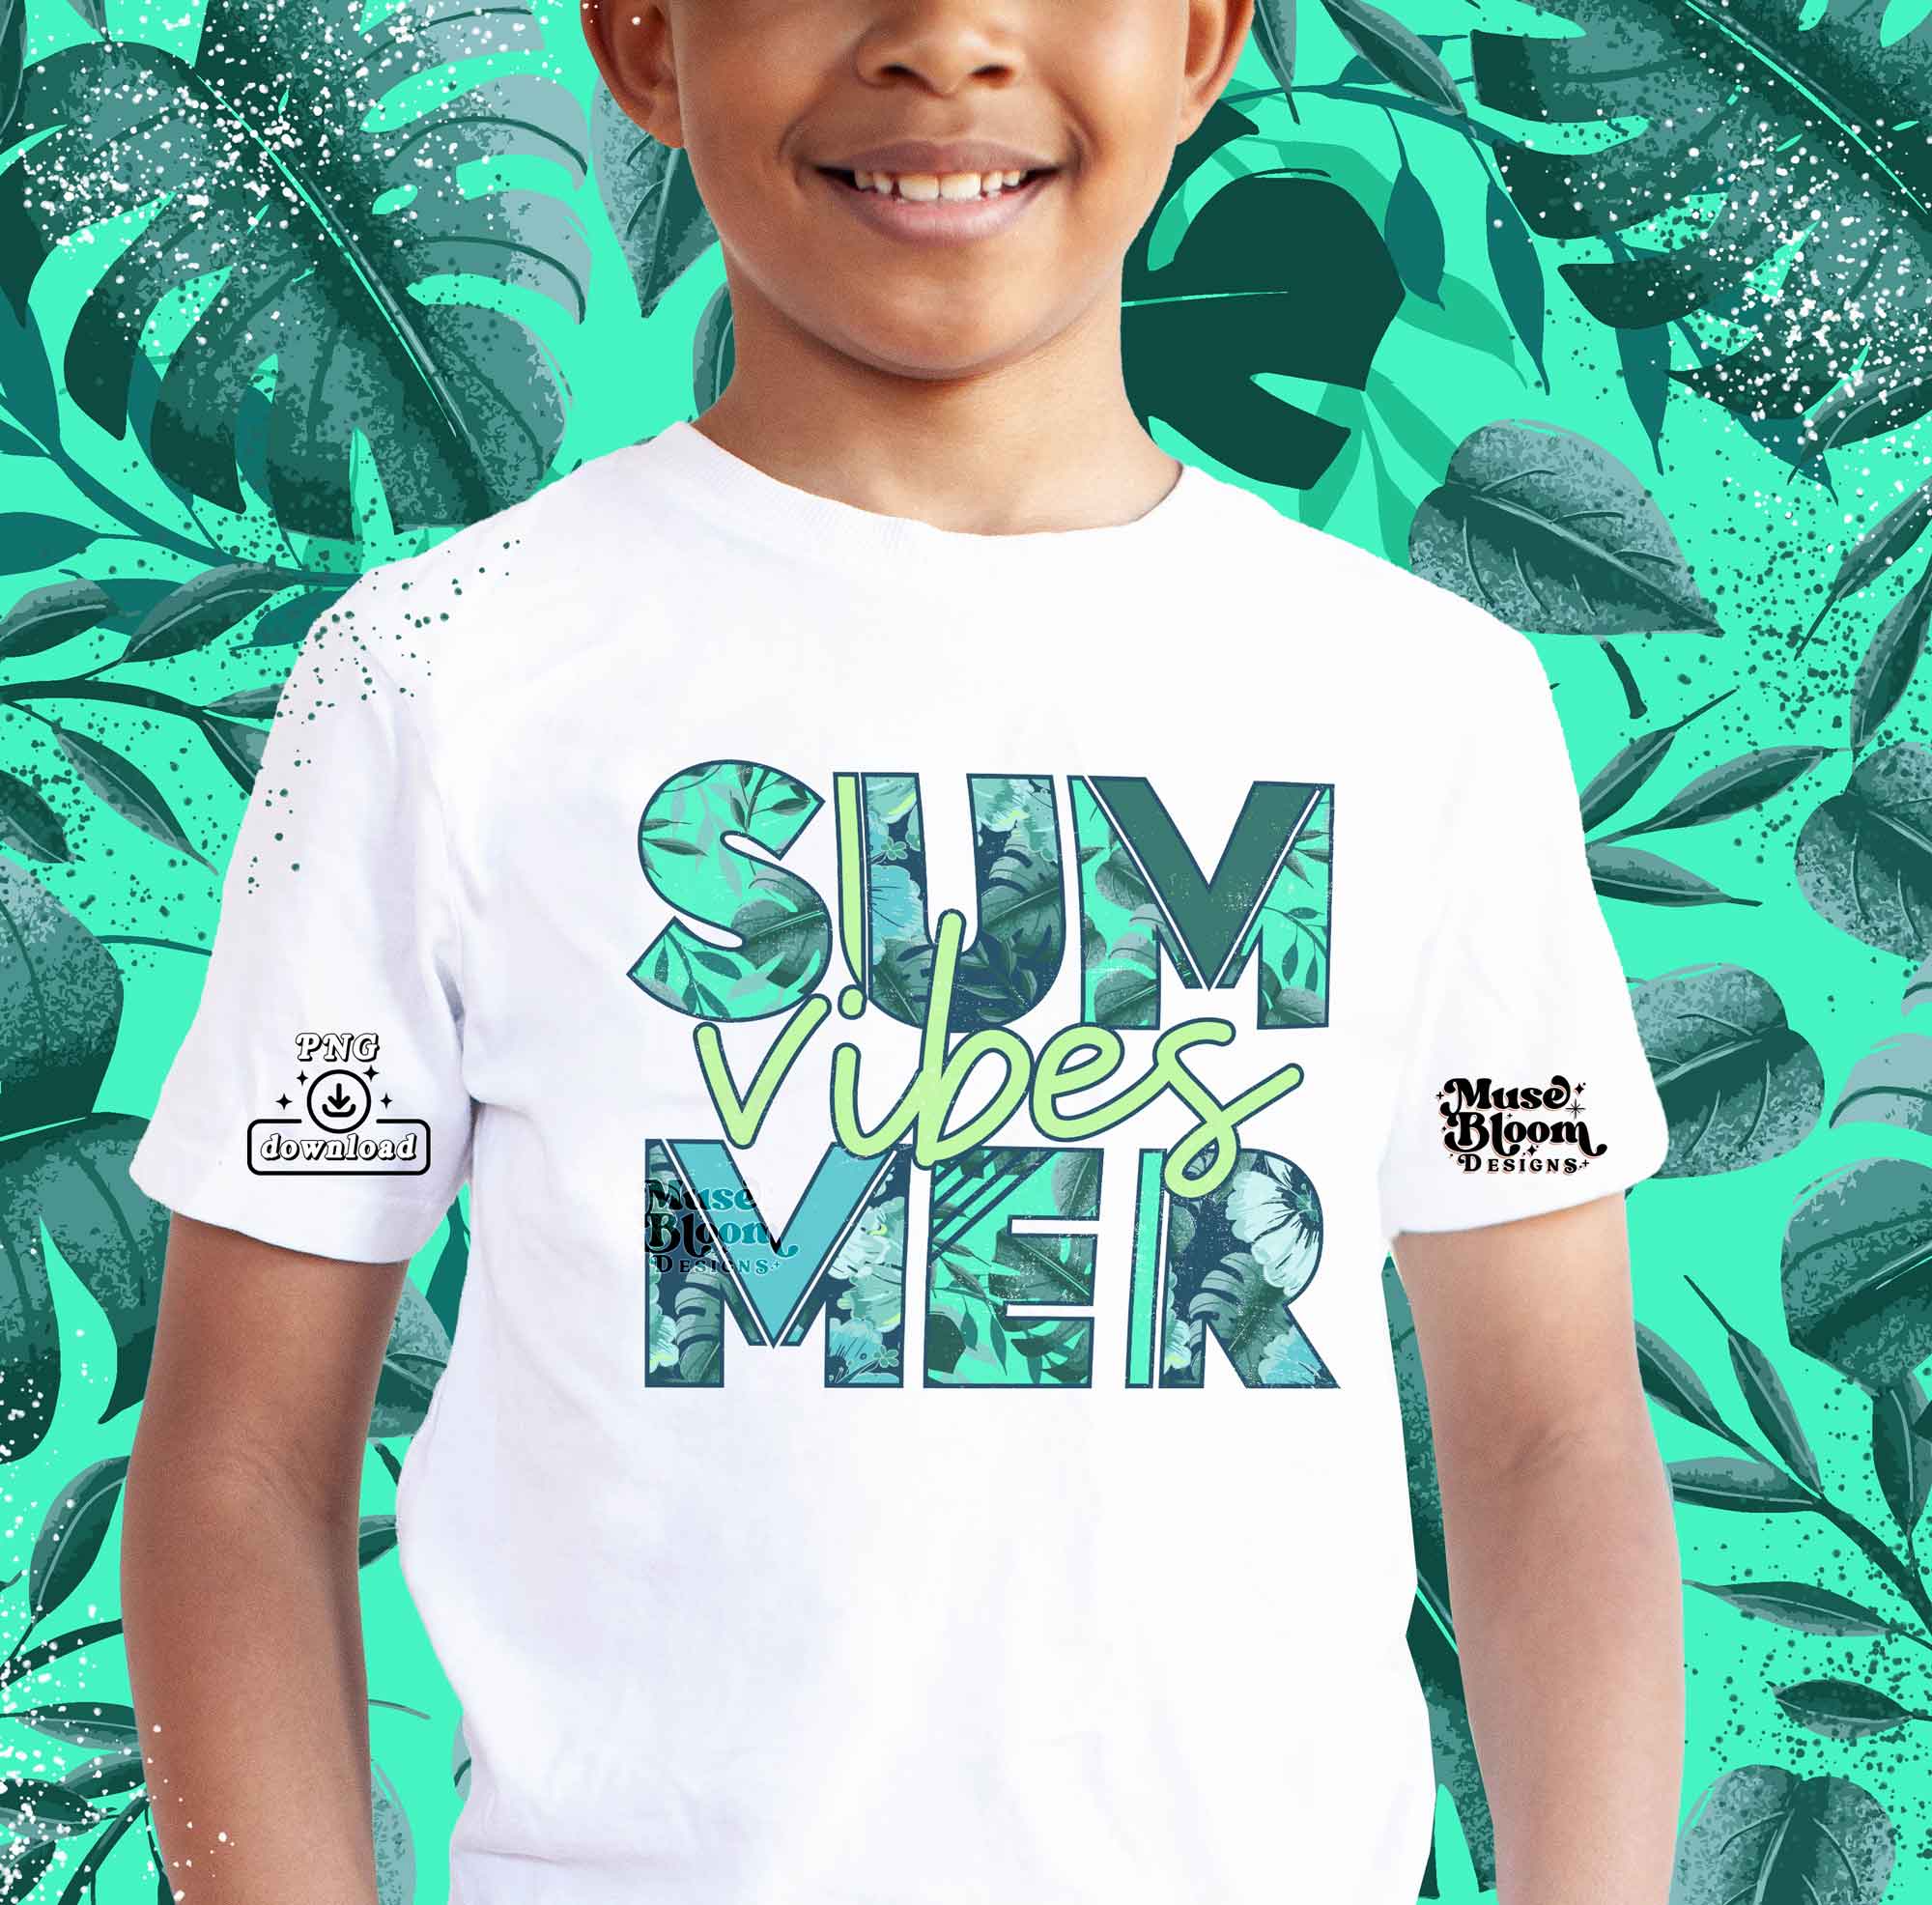 cool designs for shirts for boys